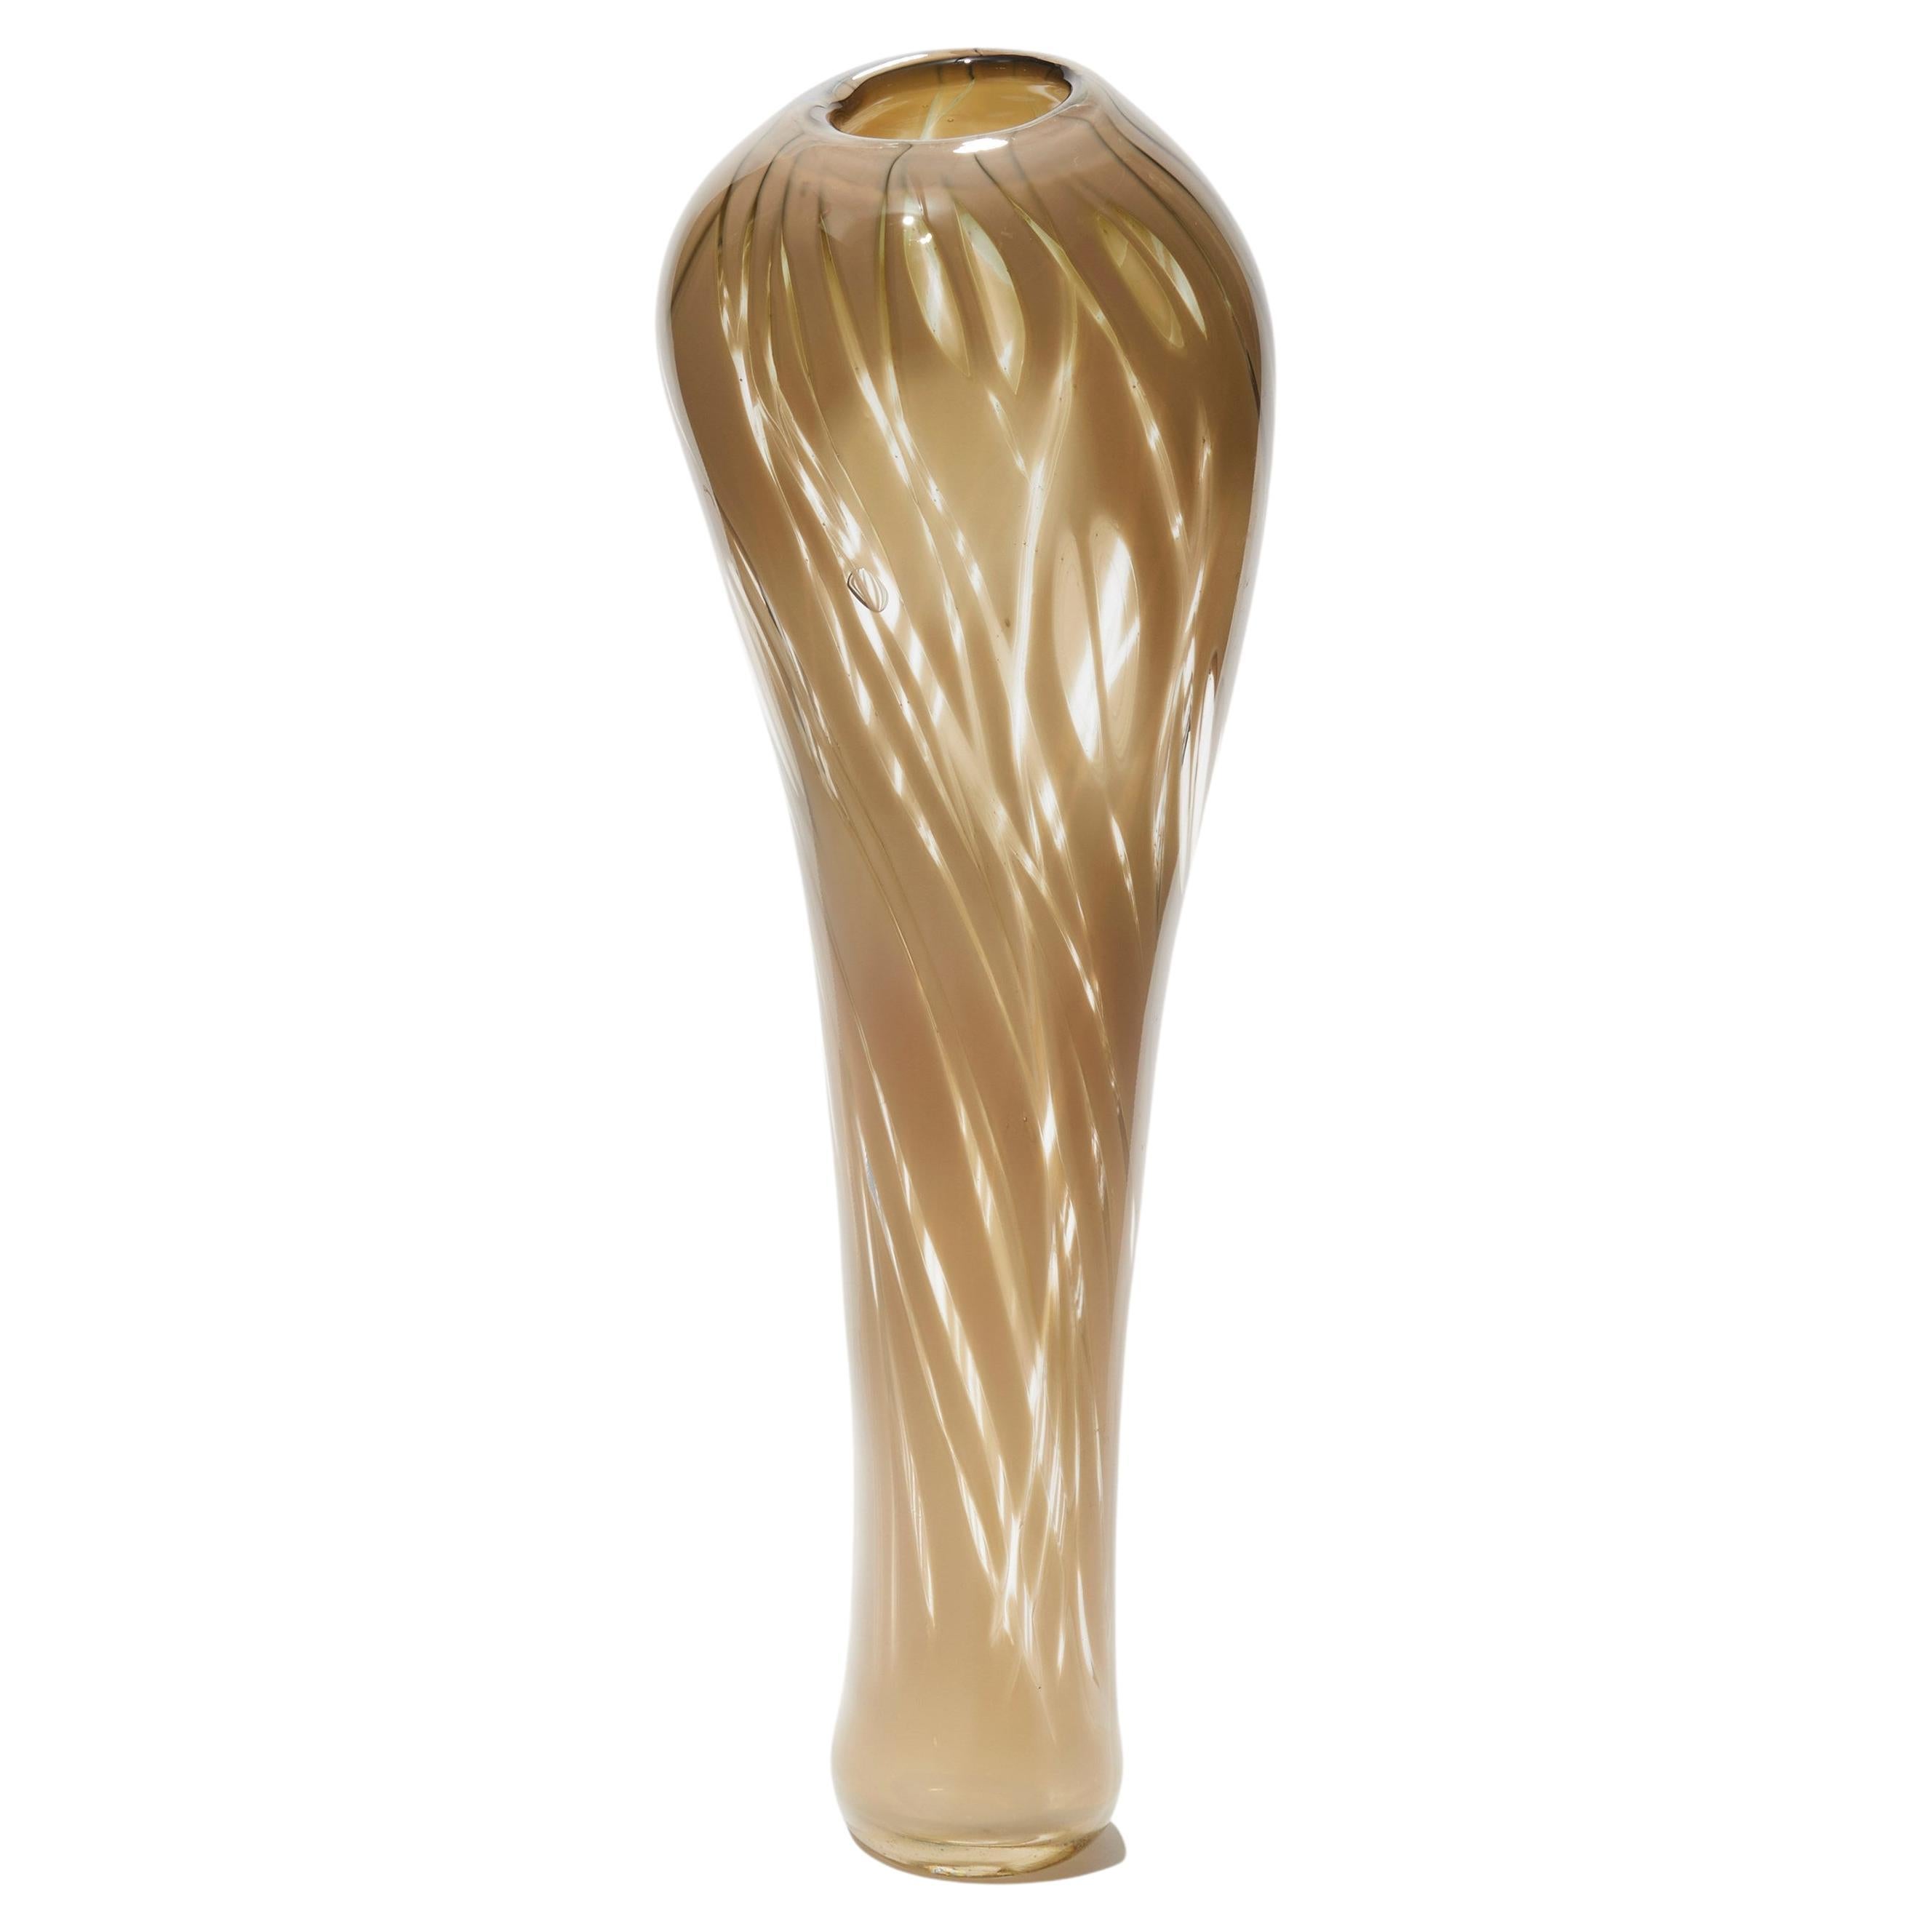 Cotinus I, a Fawn / Nude / Beige Sculptural Hand Blown Vase by Michèle Oberdieck